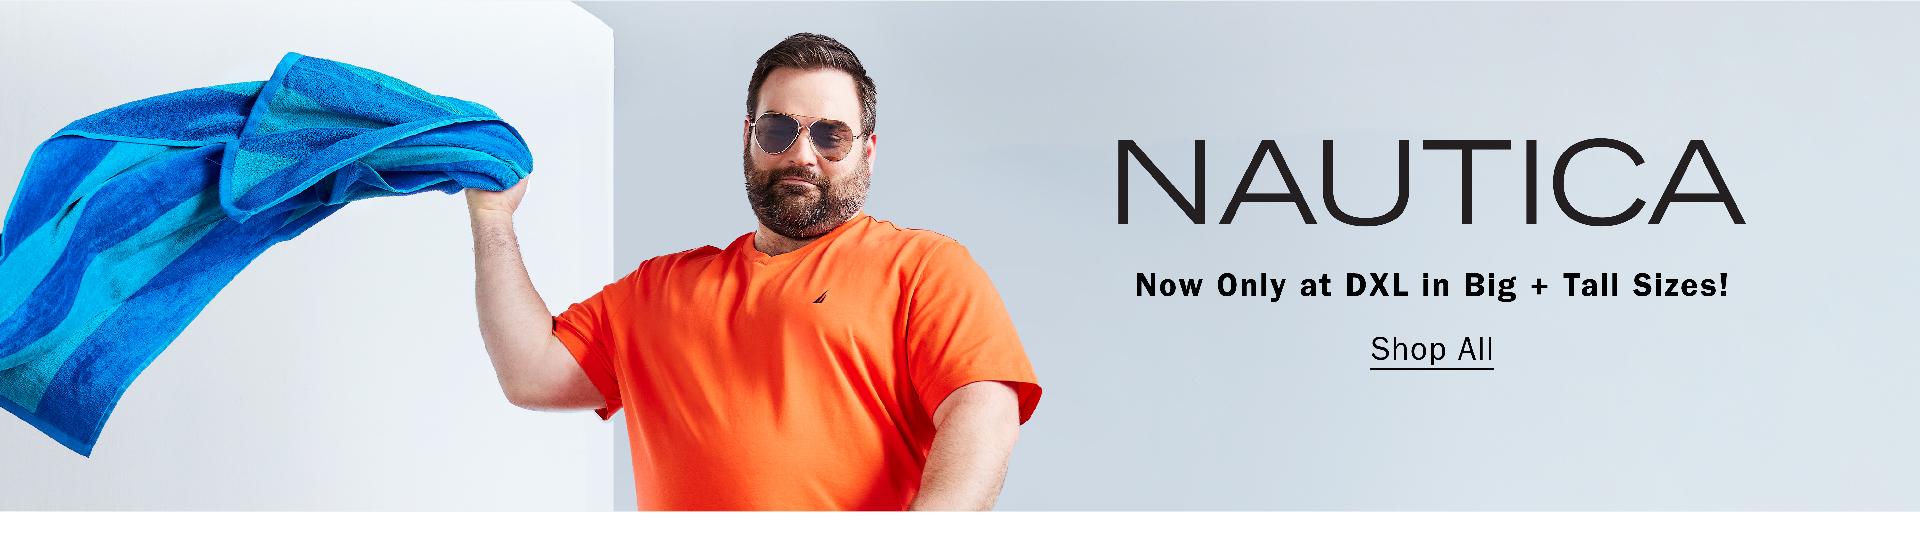 NAUTICA | Now Only at DXL in Big + Tall Sizes! | Shop All